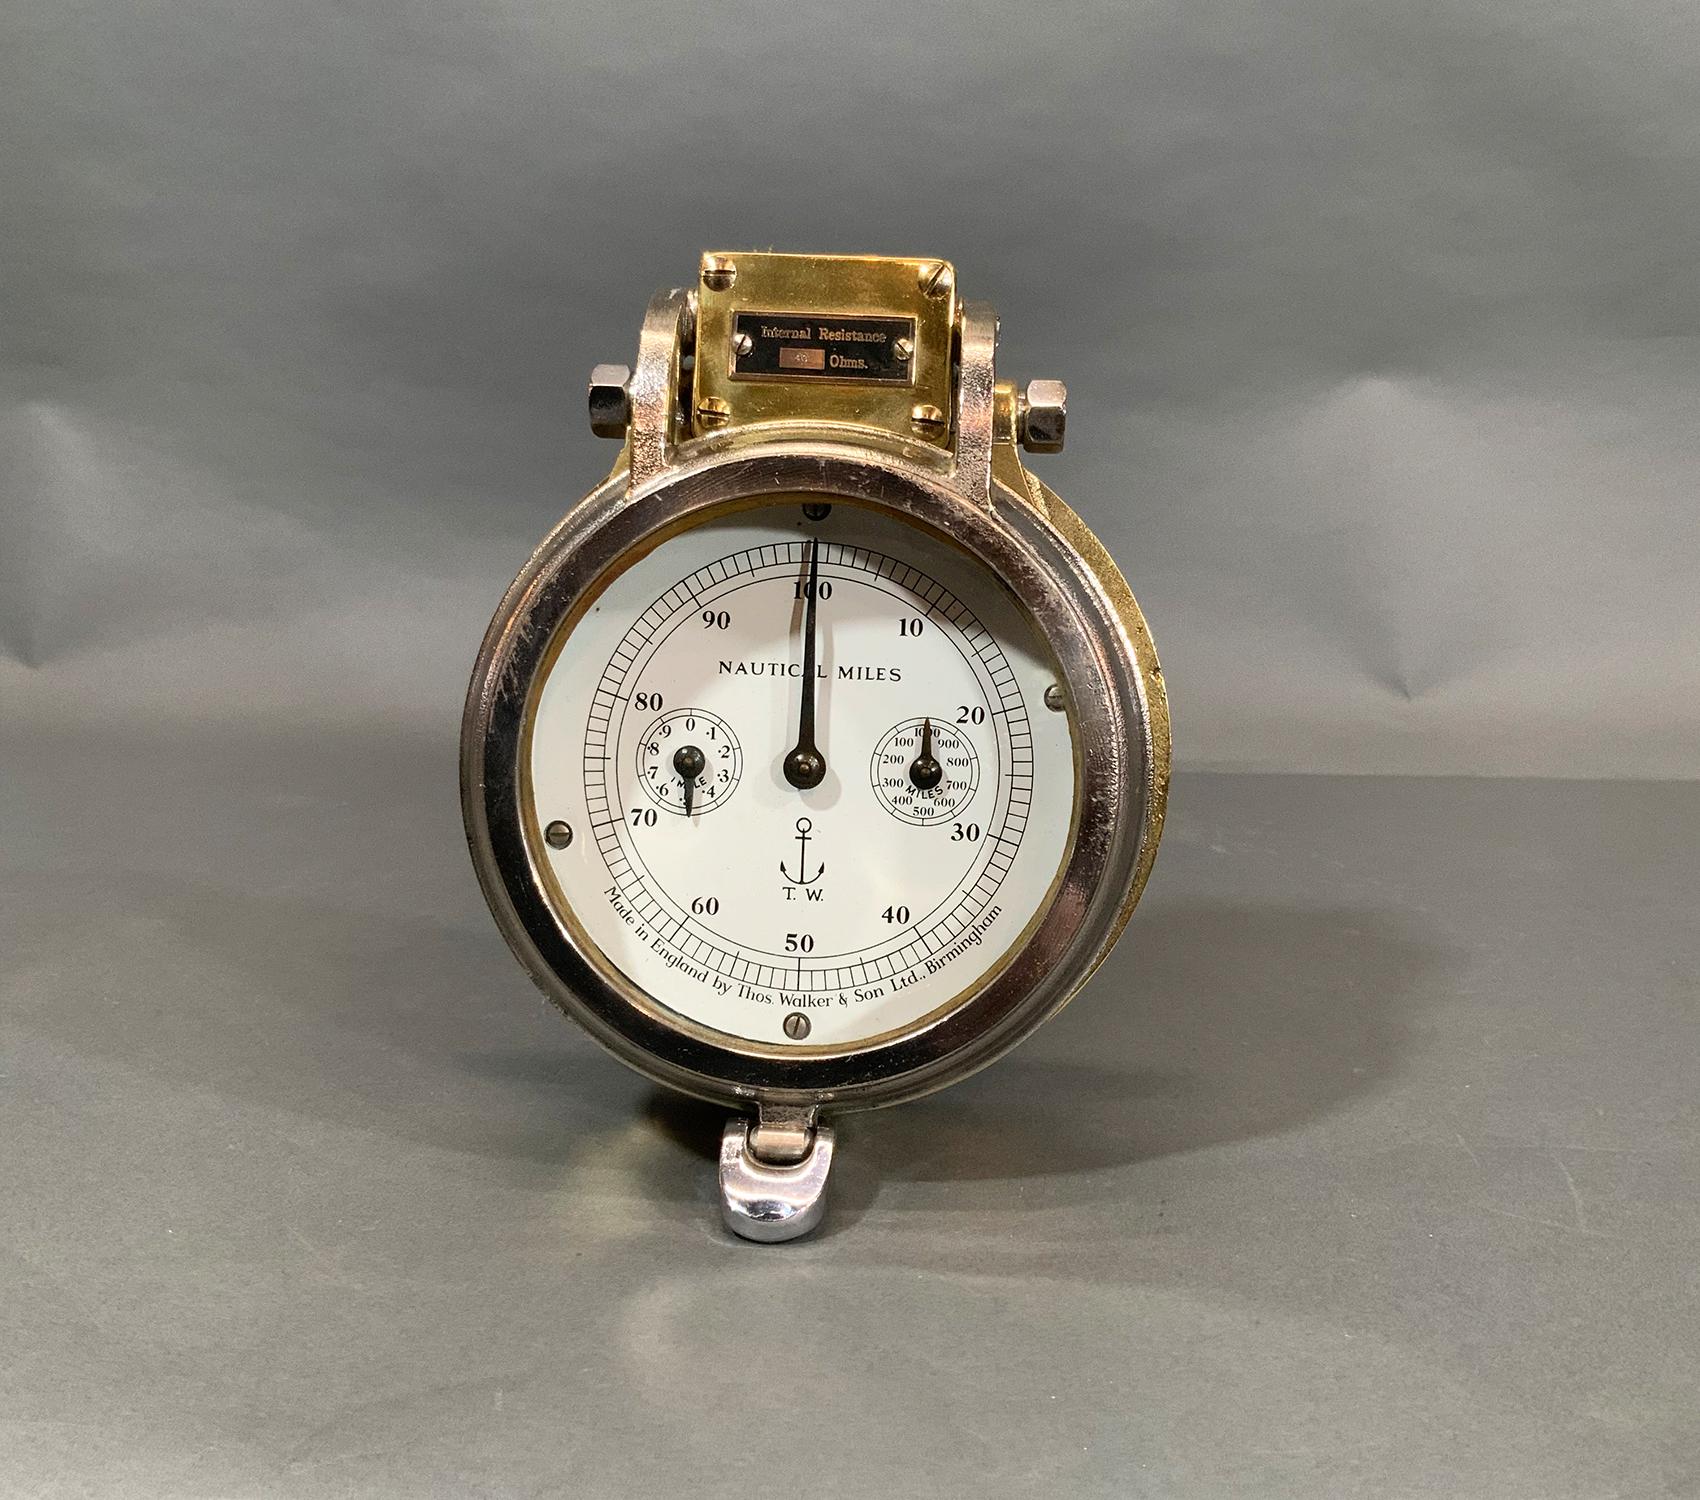 Made in England by Thomas Walker and Son LTD Birmingham. Triple dial, anchor logo, nautical miles, and per mile and hundred miles gauges. Great piece of nautical décor.

Weight: 8 LBS
Overall Dimensions: 9